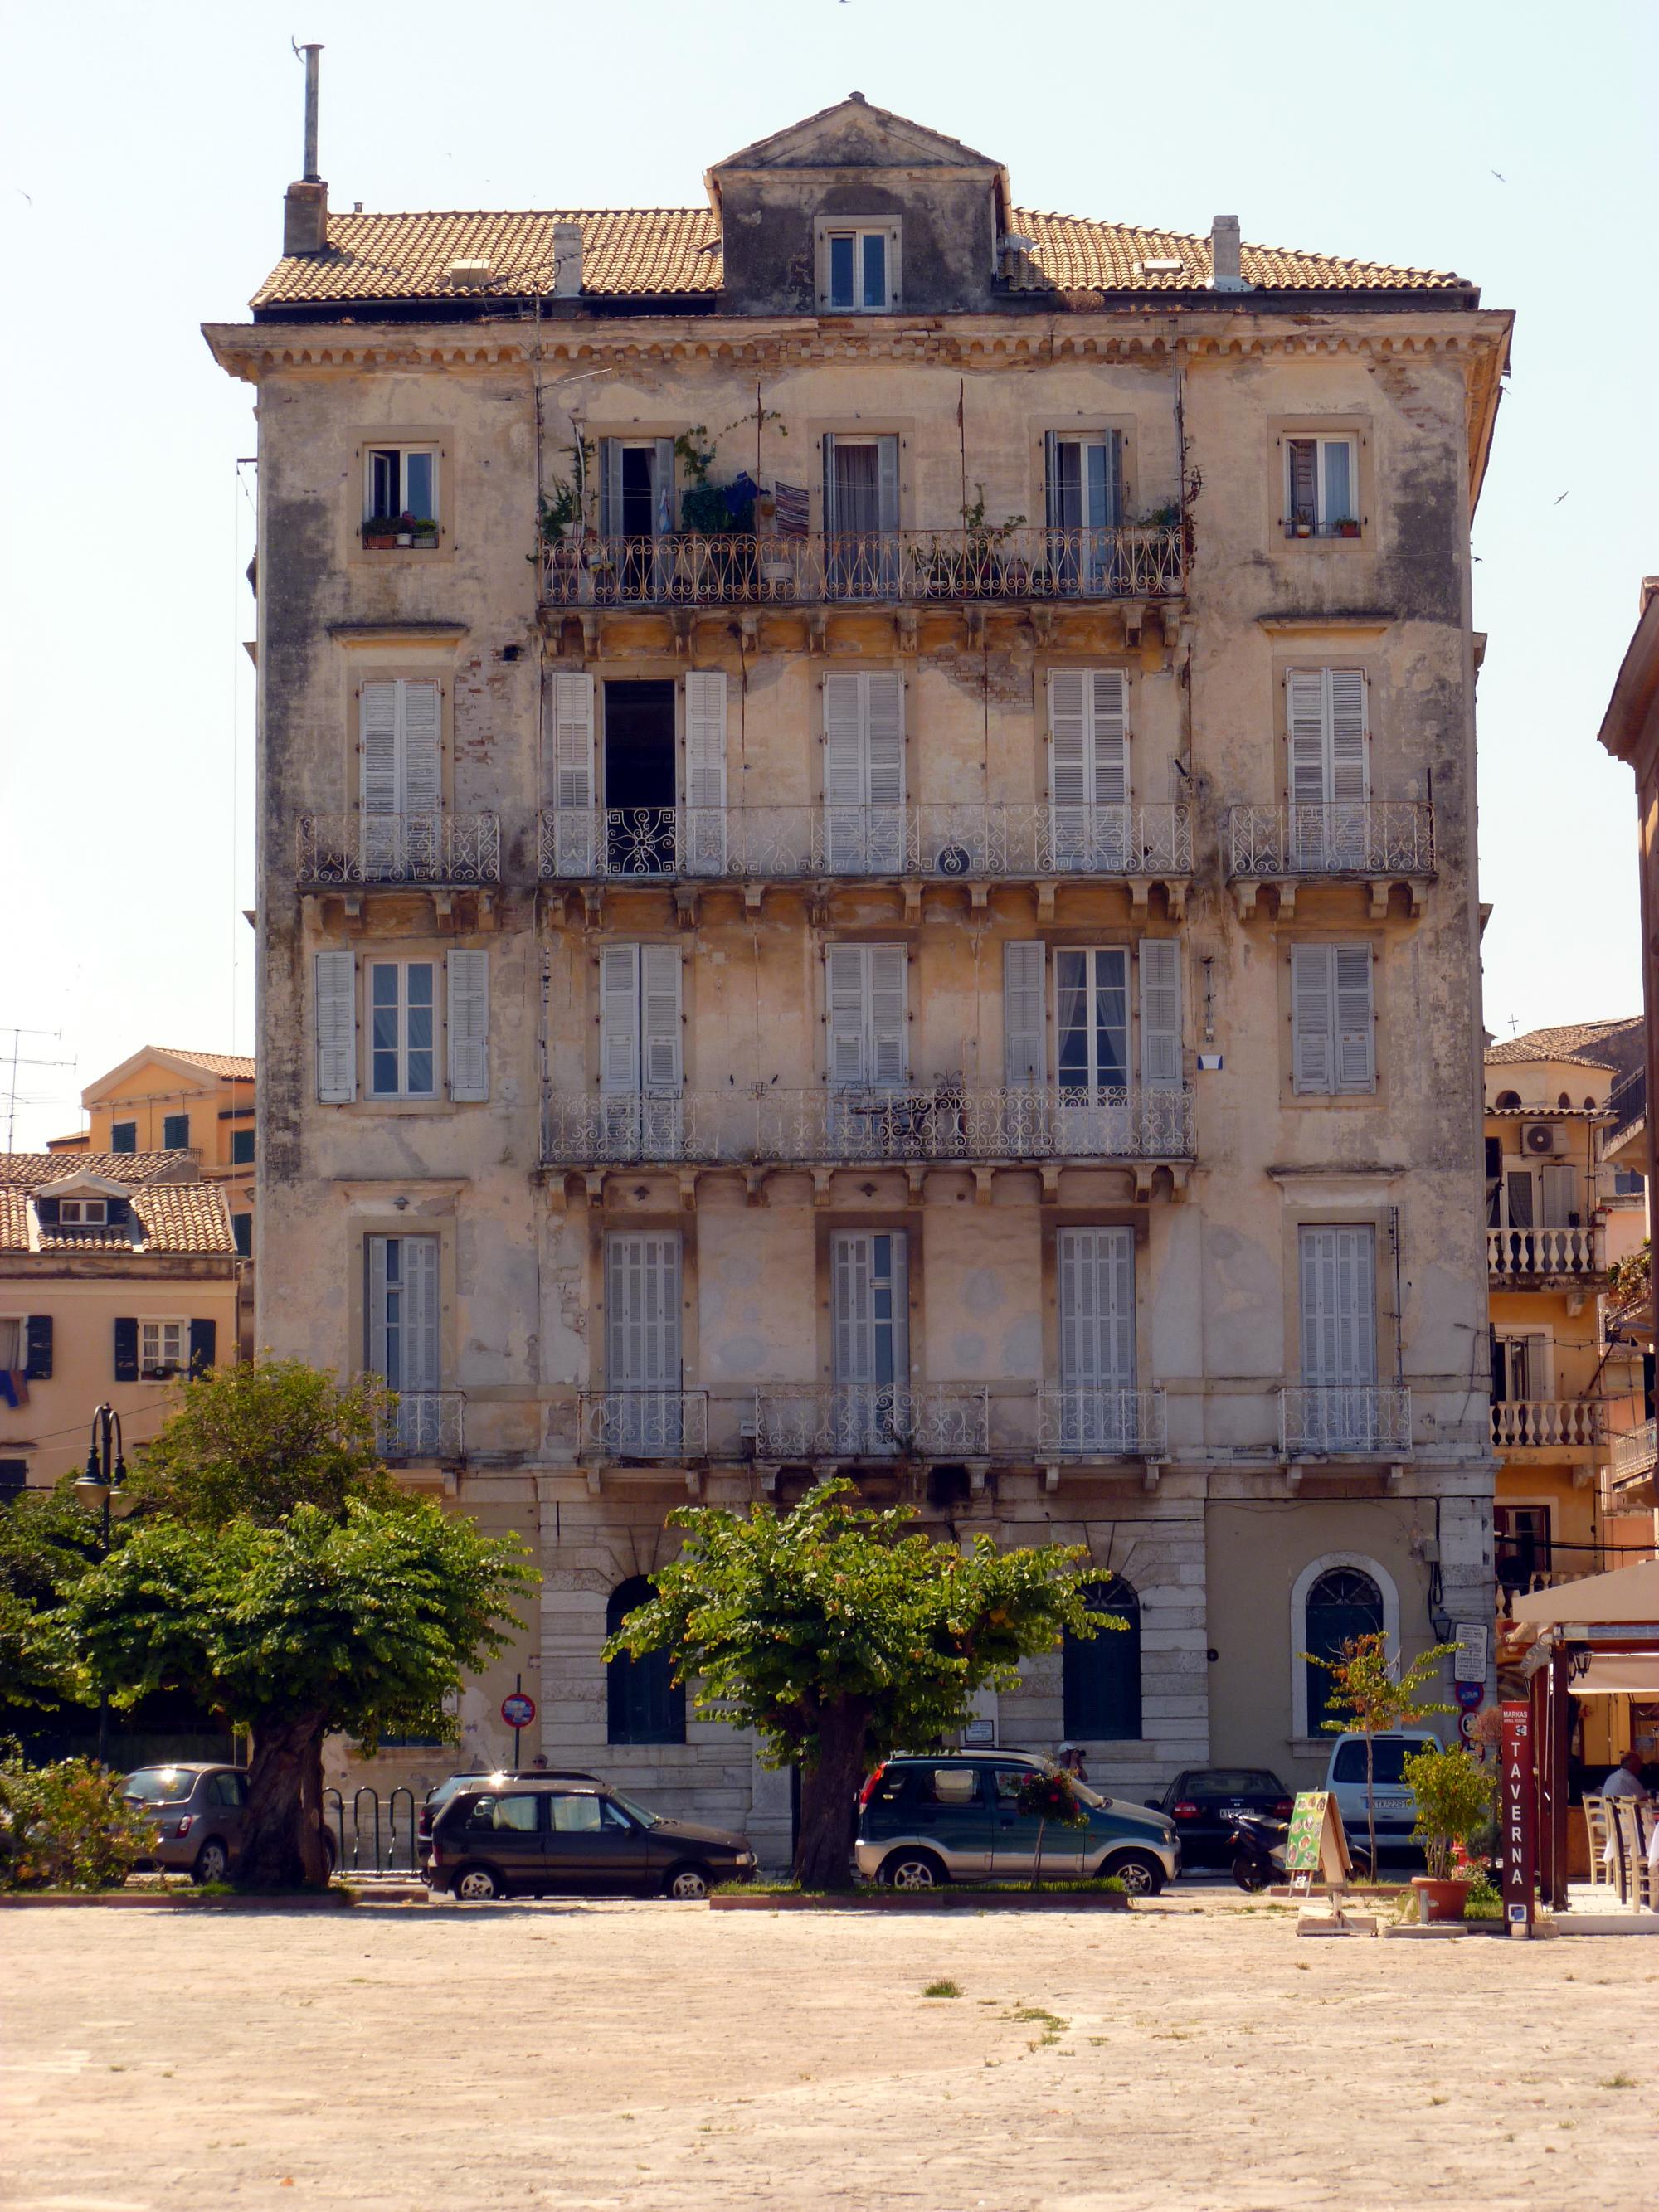 Greece - Old Building